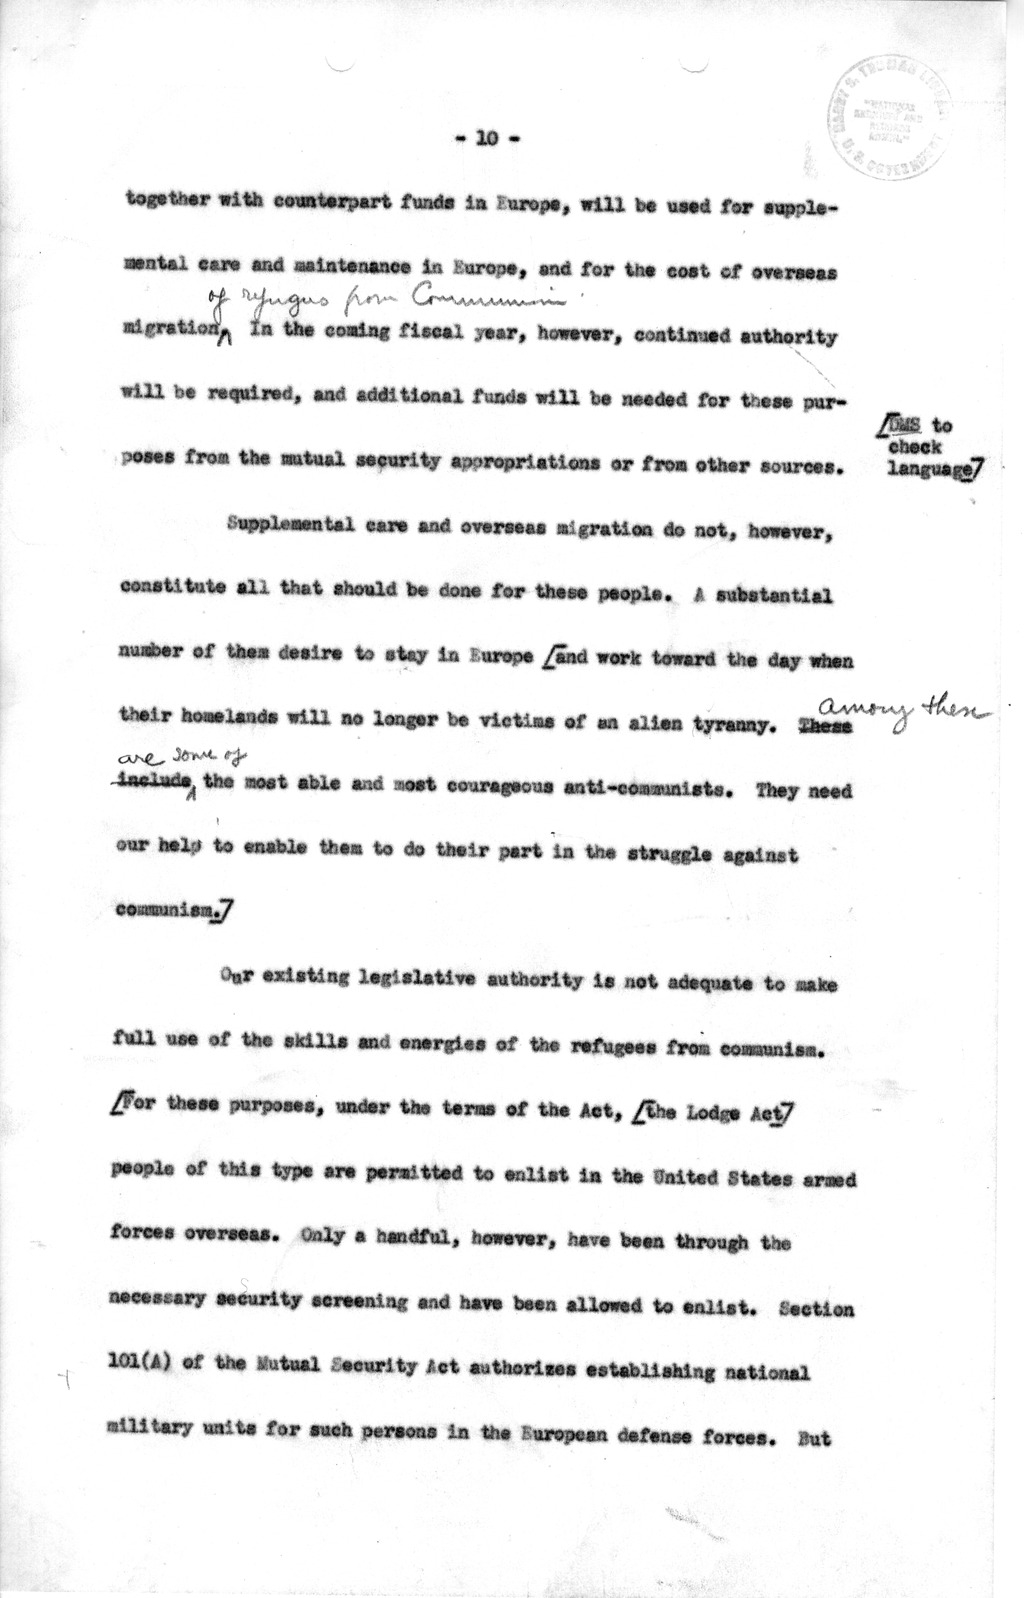 Memorandum from Carlile Bolton-Smith To Richard Neustadt, with Attached Draft of Message